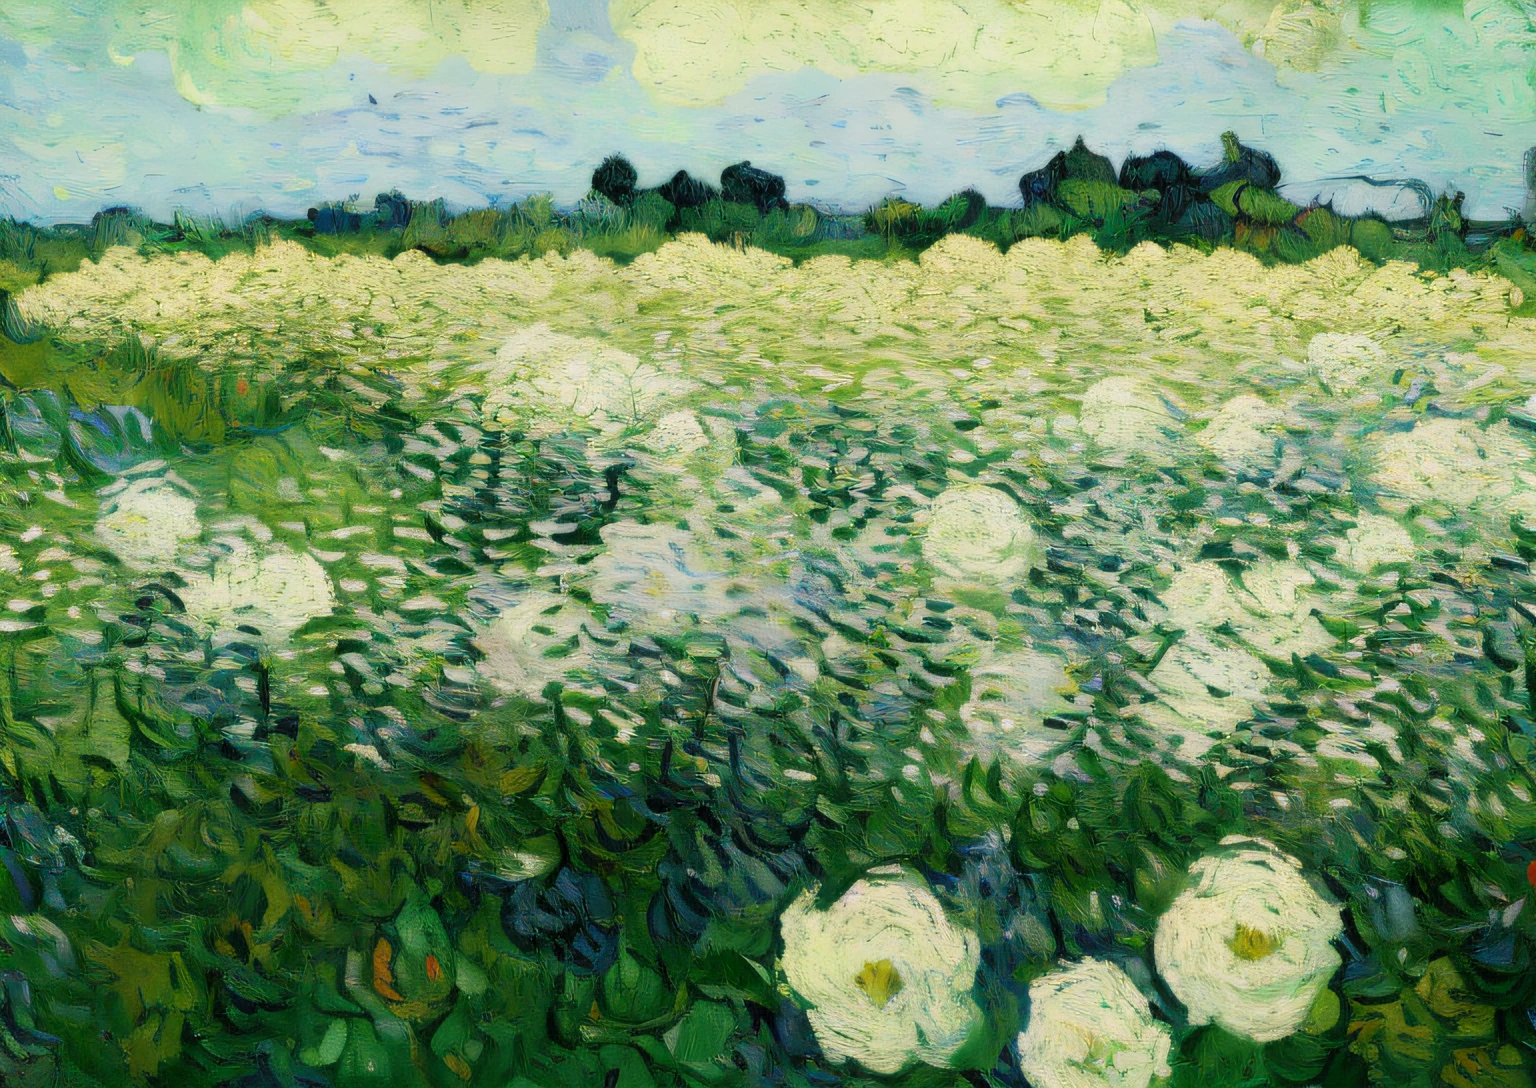 Draw white flowers on a green field，A bird flies by, vincent van gogh painting, author：Van Gogh, author：Vincent van Gogh, van gogh painting, author：highr, White flowers, flowers in foreground, White roses, post impressionist, Courtesy of the Ministry of Modern Art, year 1506, post impressionist, post impressionist